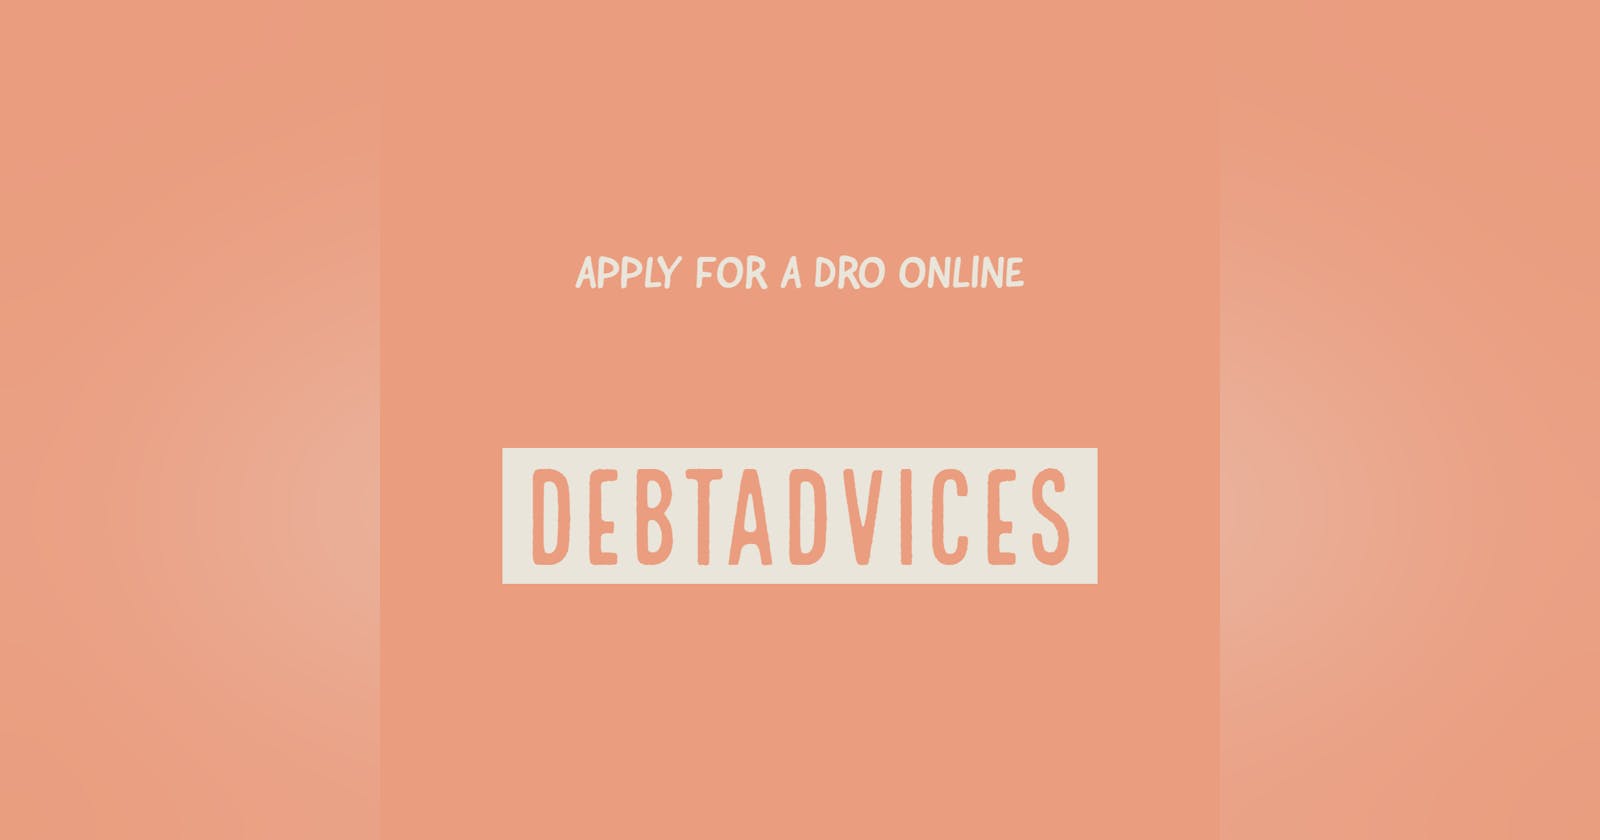 How to apply for a dro online